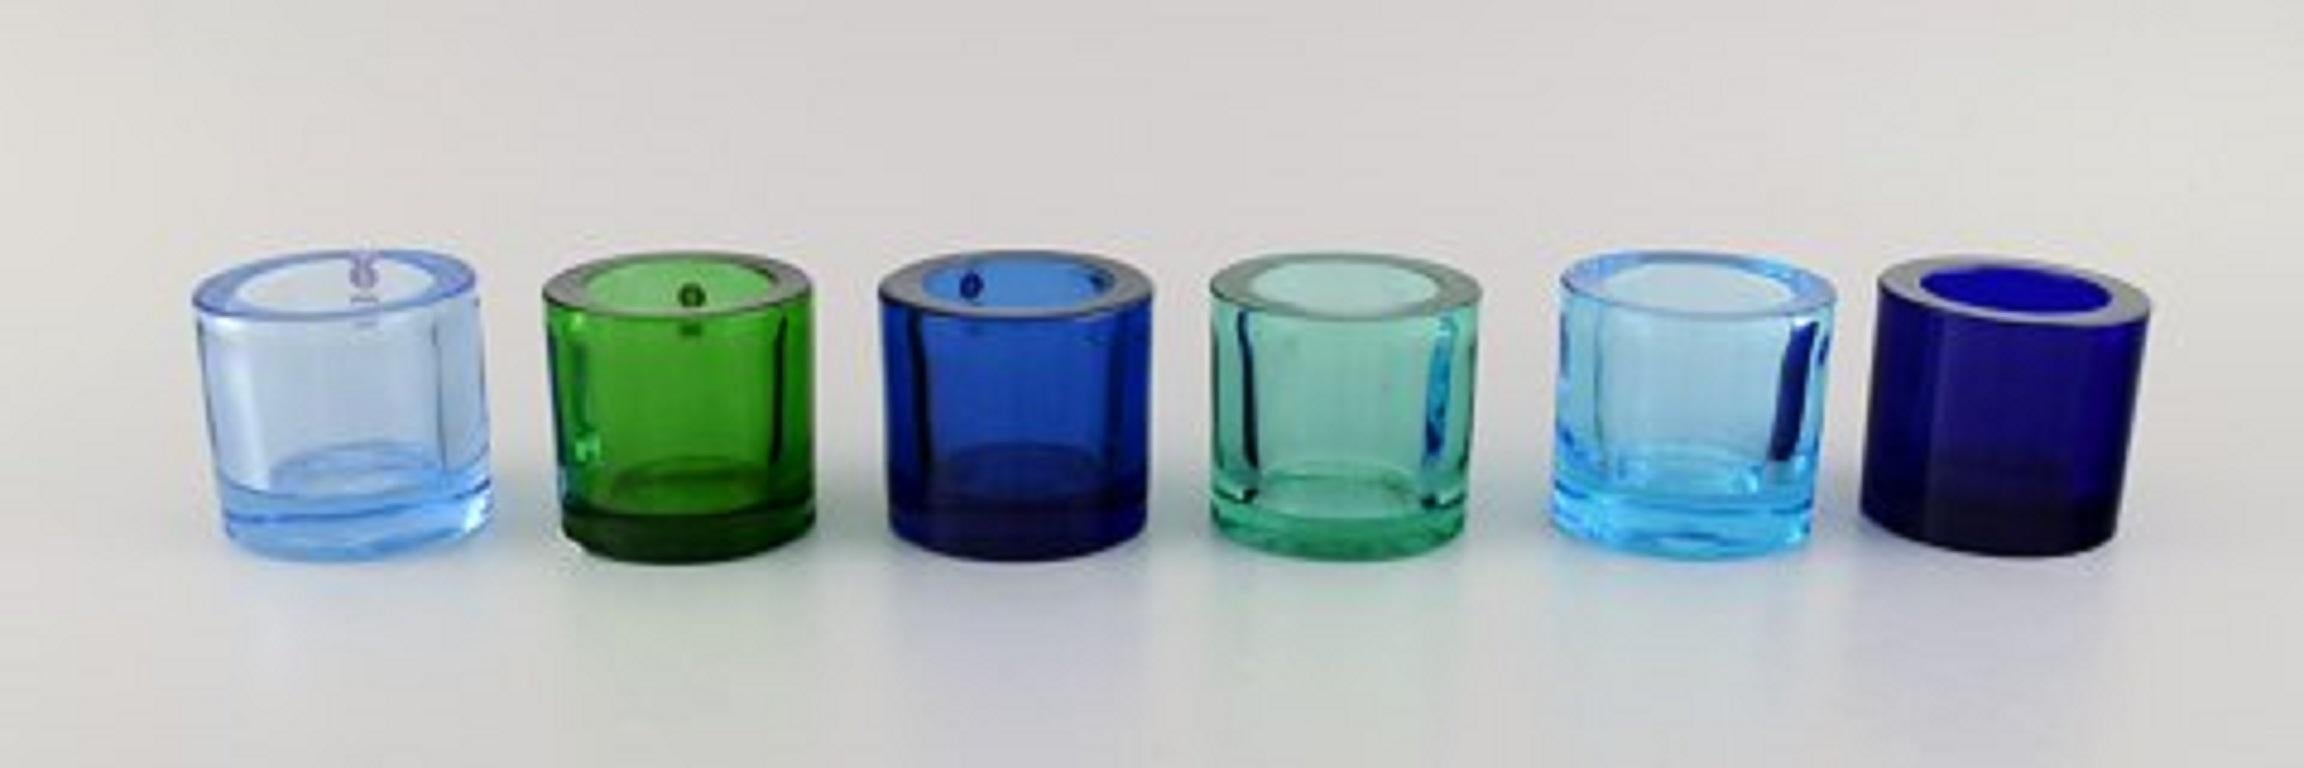 19 Iittala candle holders for tealights in art glass. Marimekko. 20th century.
Measures: 6.5 x 6 cm.
In excellent condition.
Stamped.